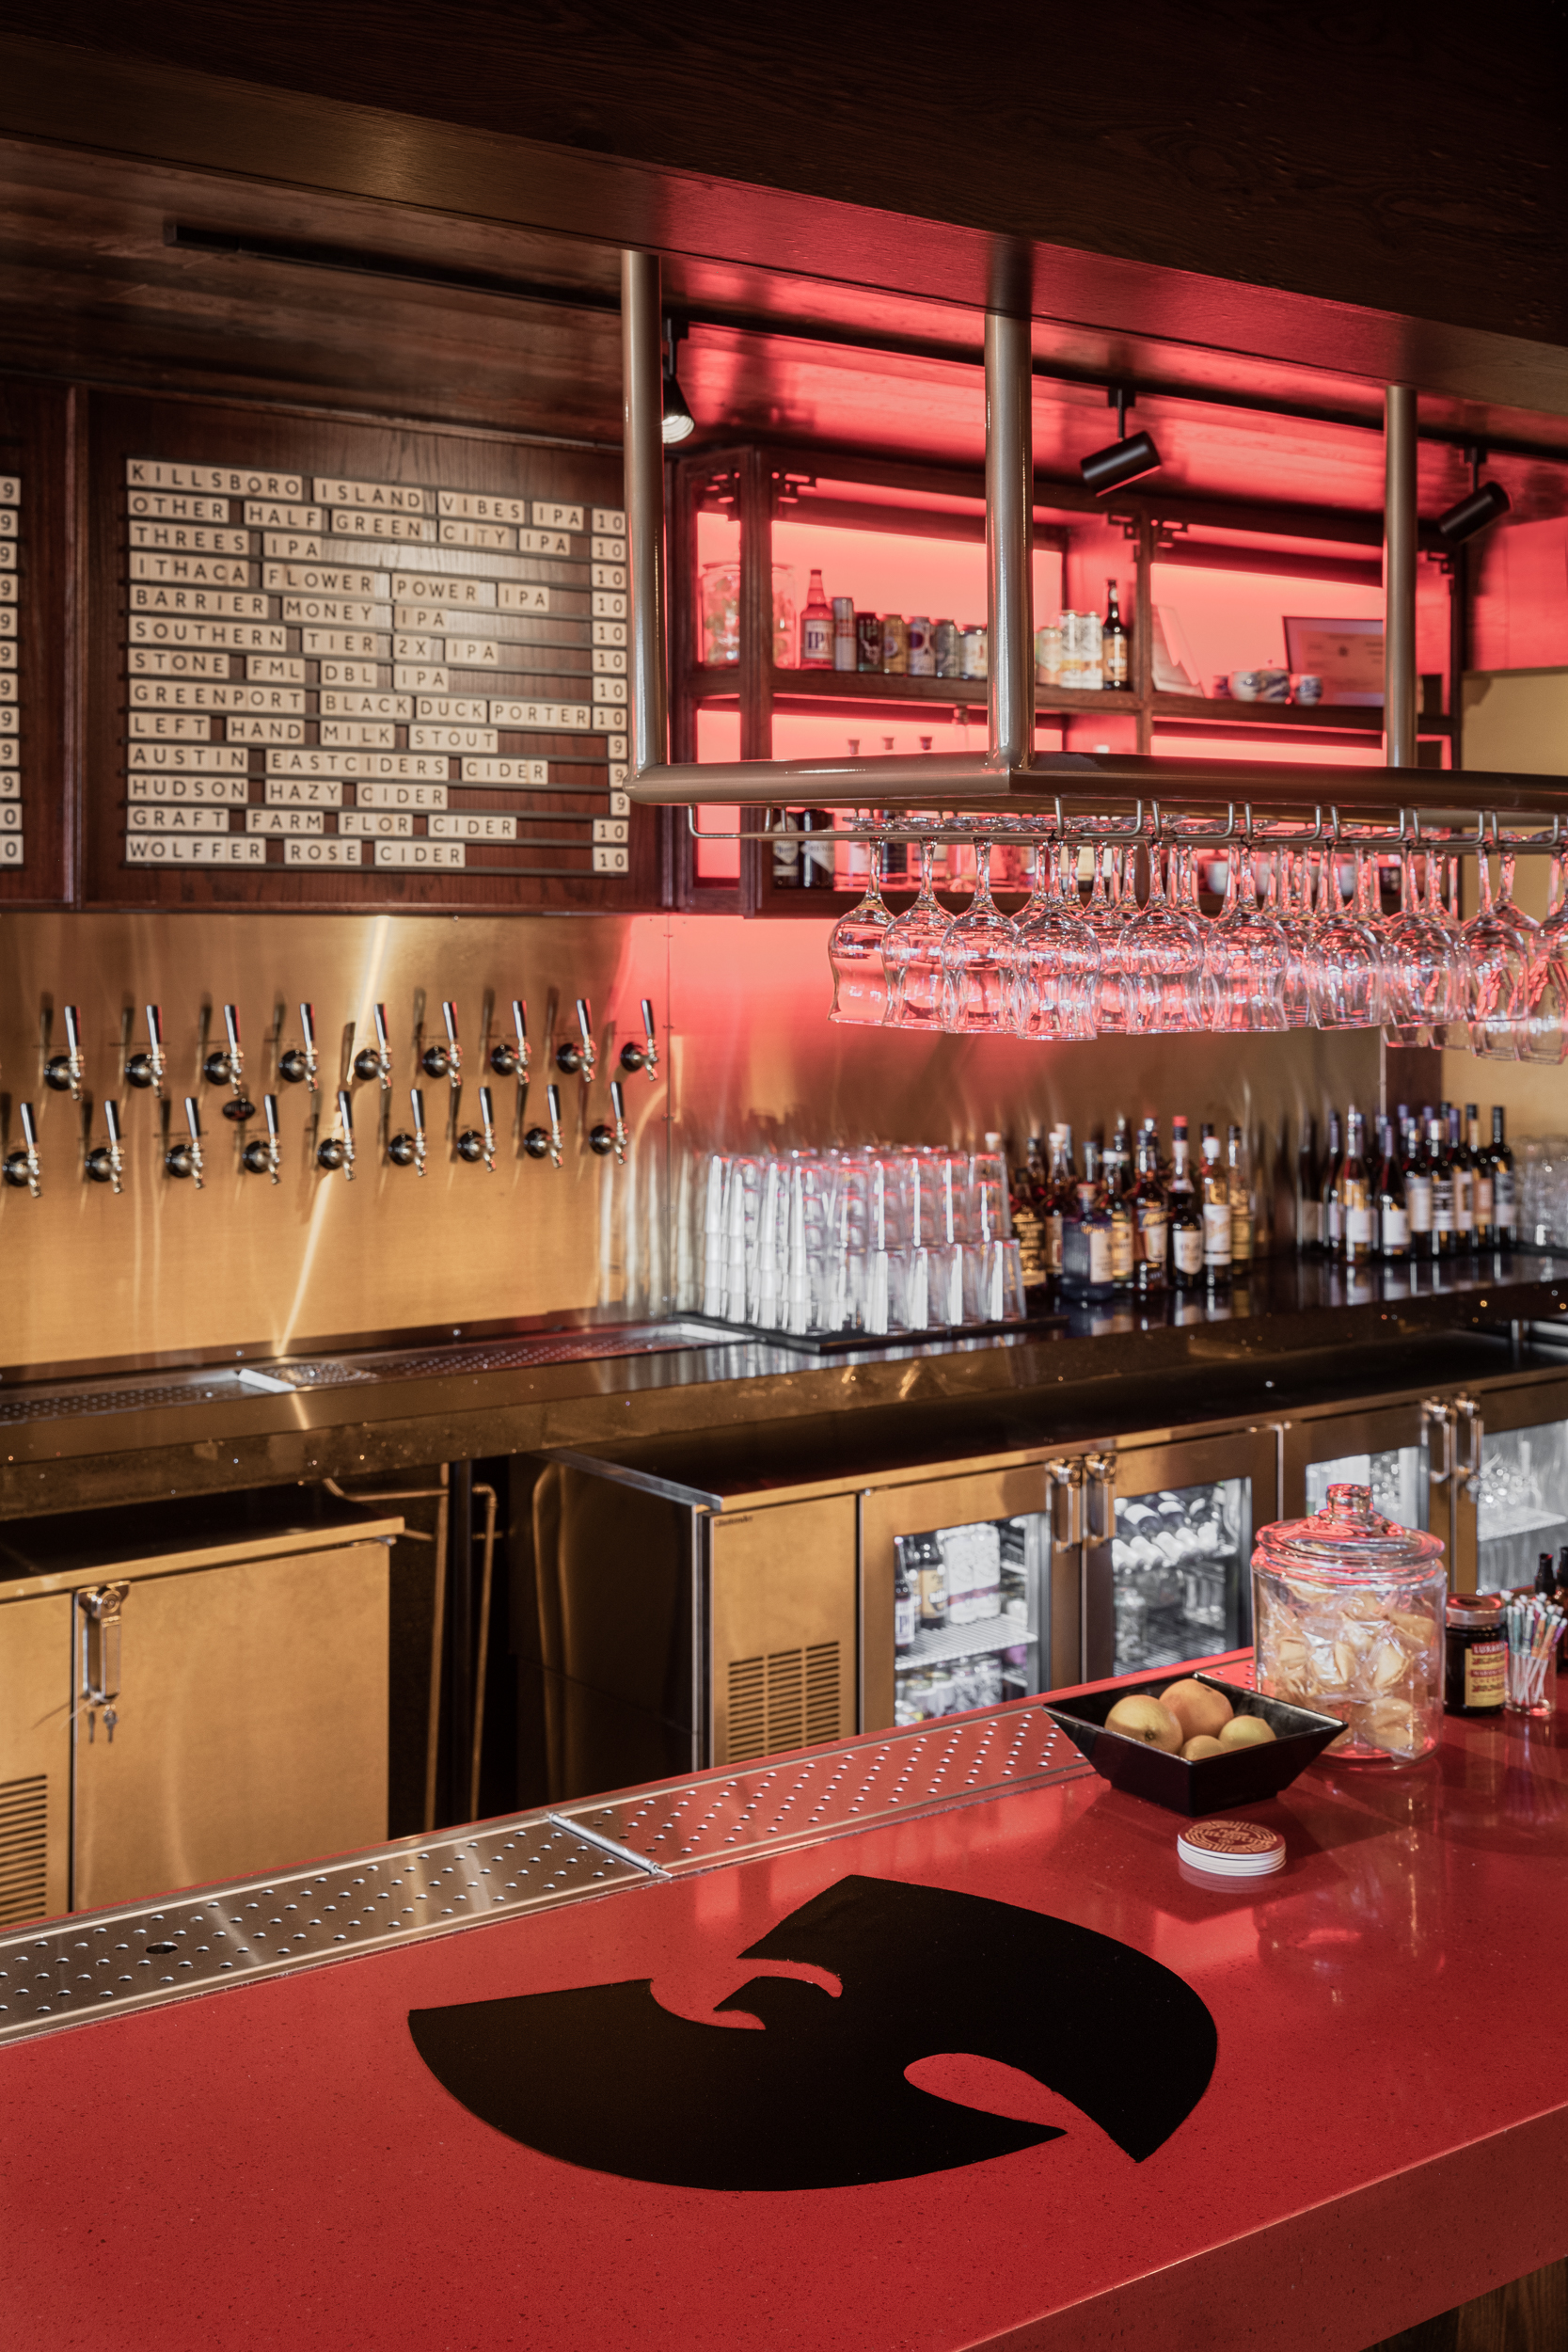 A shot of a red bar's surface with a black Wu-Tang Clan "W" logo in the center of the bar's surface. Sitting on the bar surface are a bowl of blood oranges, a jar of fortune cookies, and other assorted bar goodies to the right. Behind the bar are several beer taps, a menu of several drinks, and neatly organized sets of clean glasses stacked upside down, and various bottles of liquor/spirits.